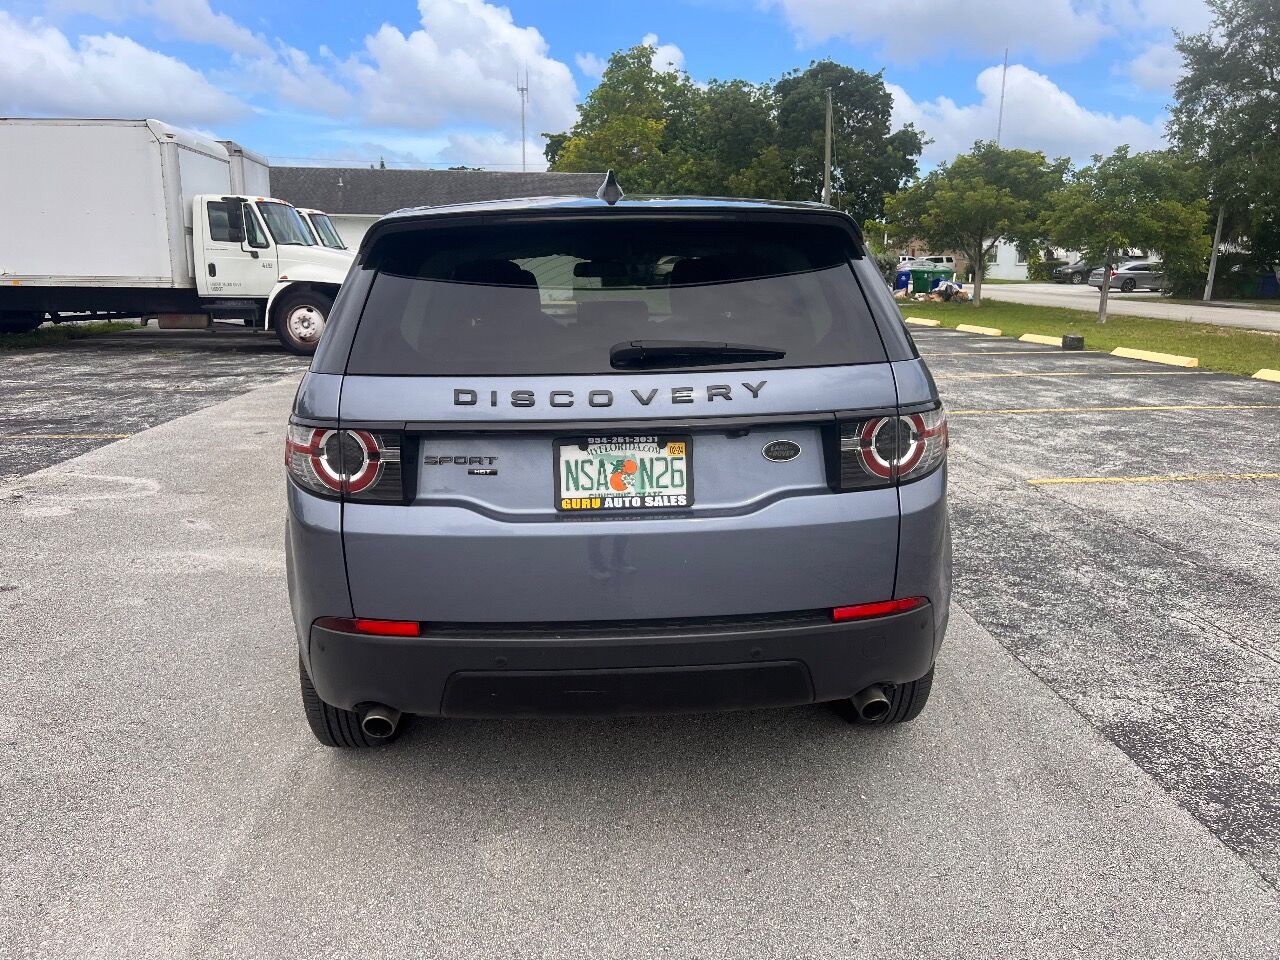 2019 LAND ROVER Discovery Sport SUV / Crossover - $19,650